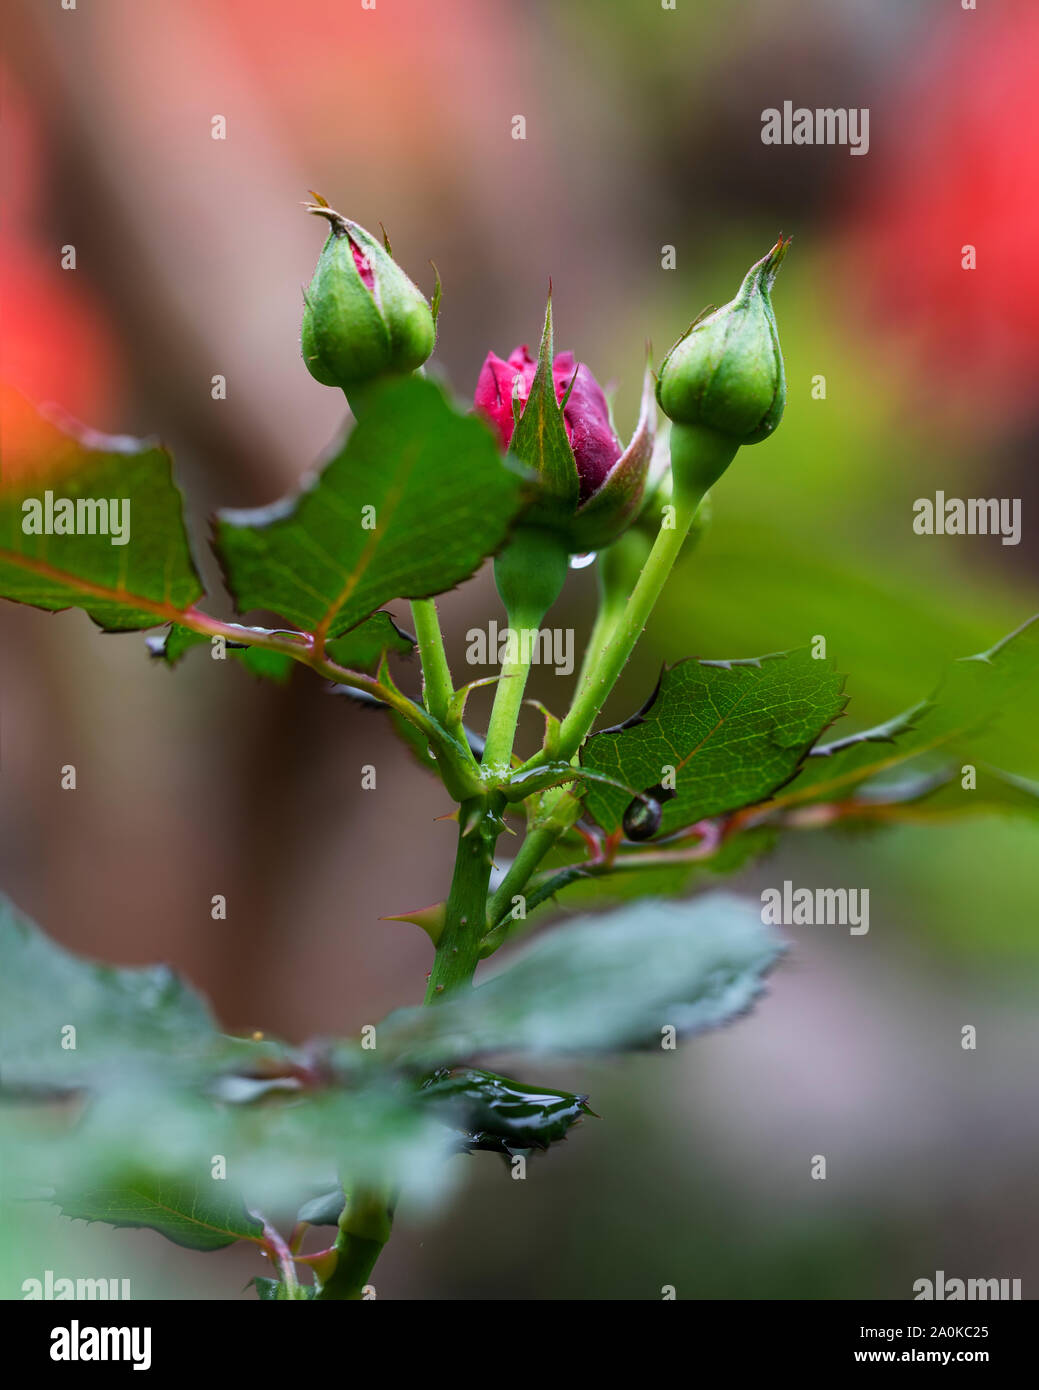 Rose buds in the garden over natural background after rain Pokhara Nepal. Stock Photo